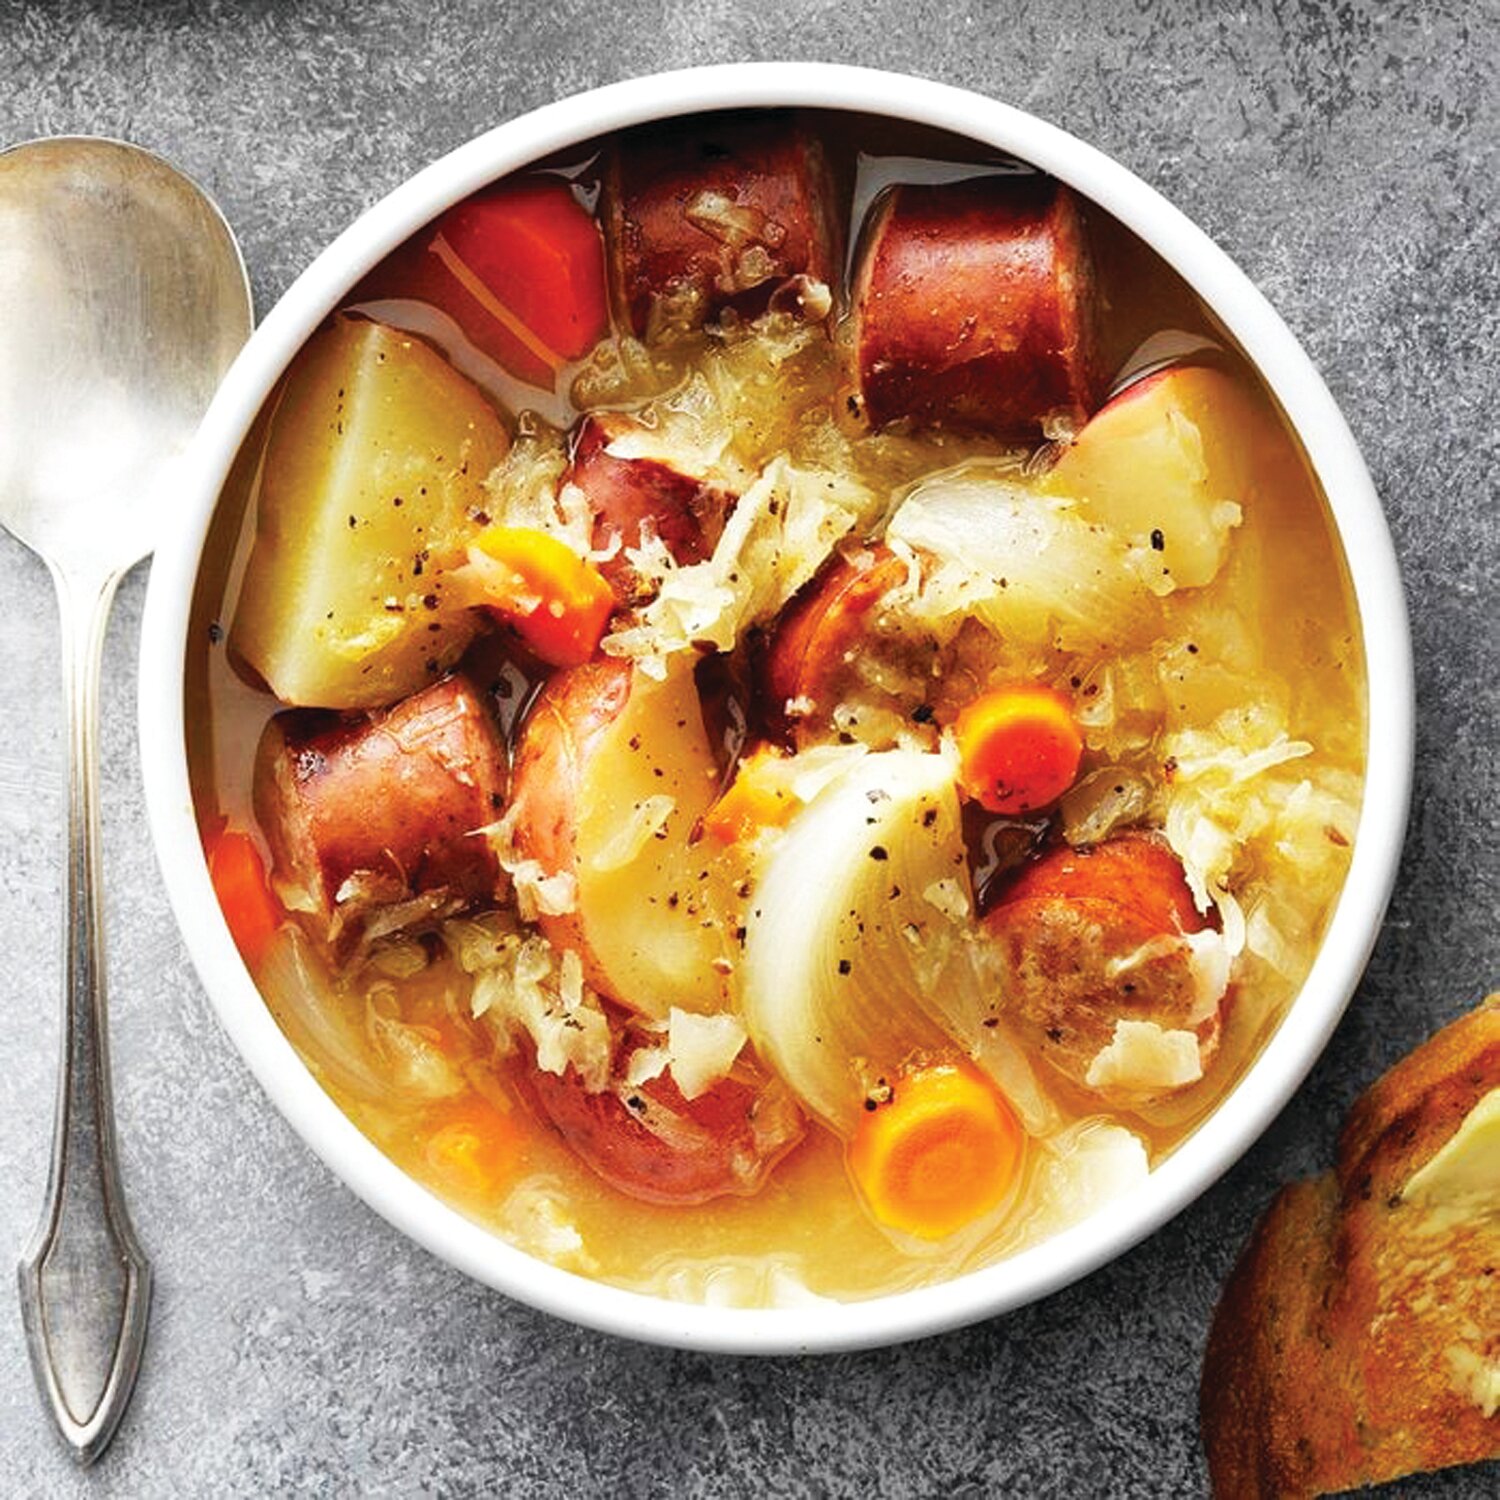 Sauerkraut doesn’t just belong on hot dogs; here it is incorporated into a tangy soup.